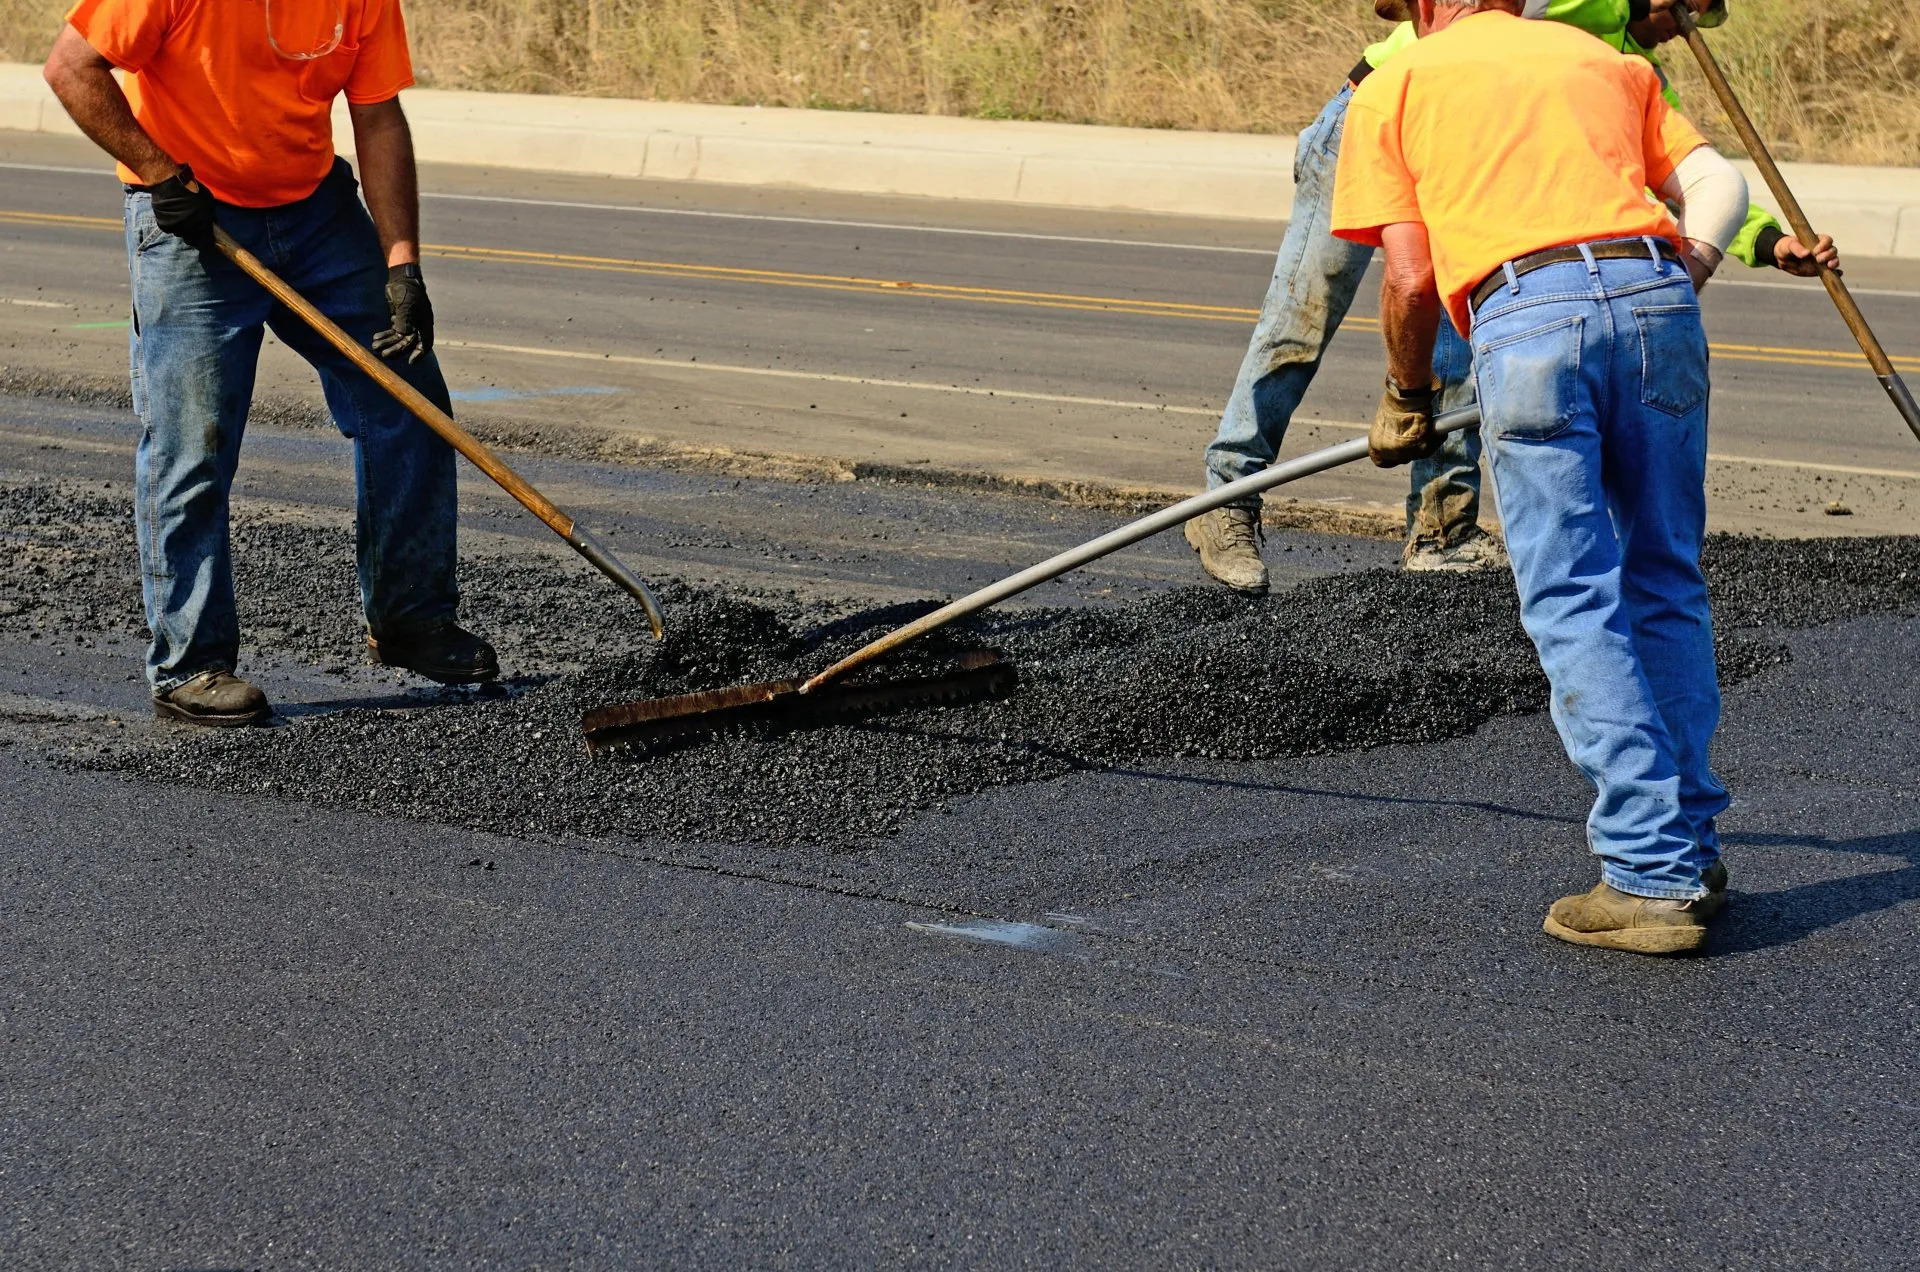 Illinois Paving / GOT A DIY PAVING PROJECT LINED UP? CONSIDER PROFESSIONAL HELP